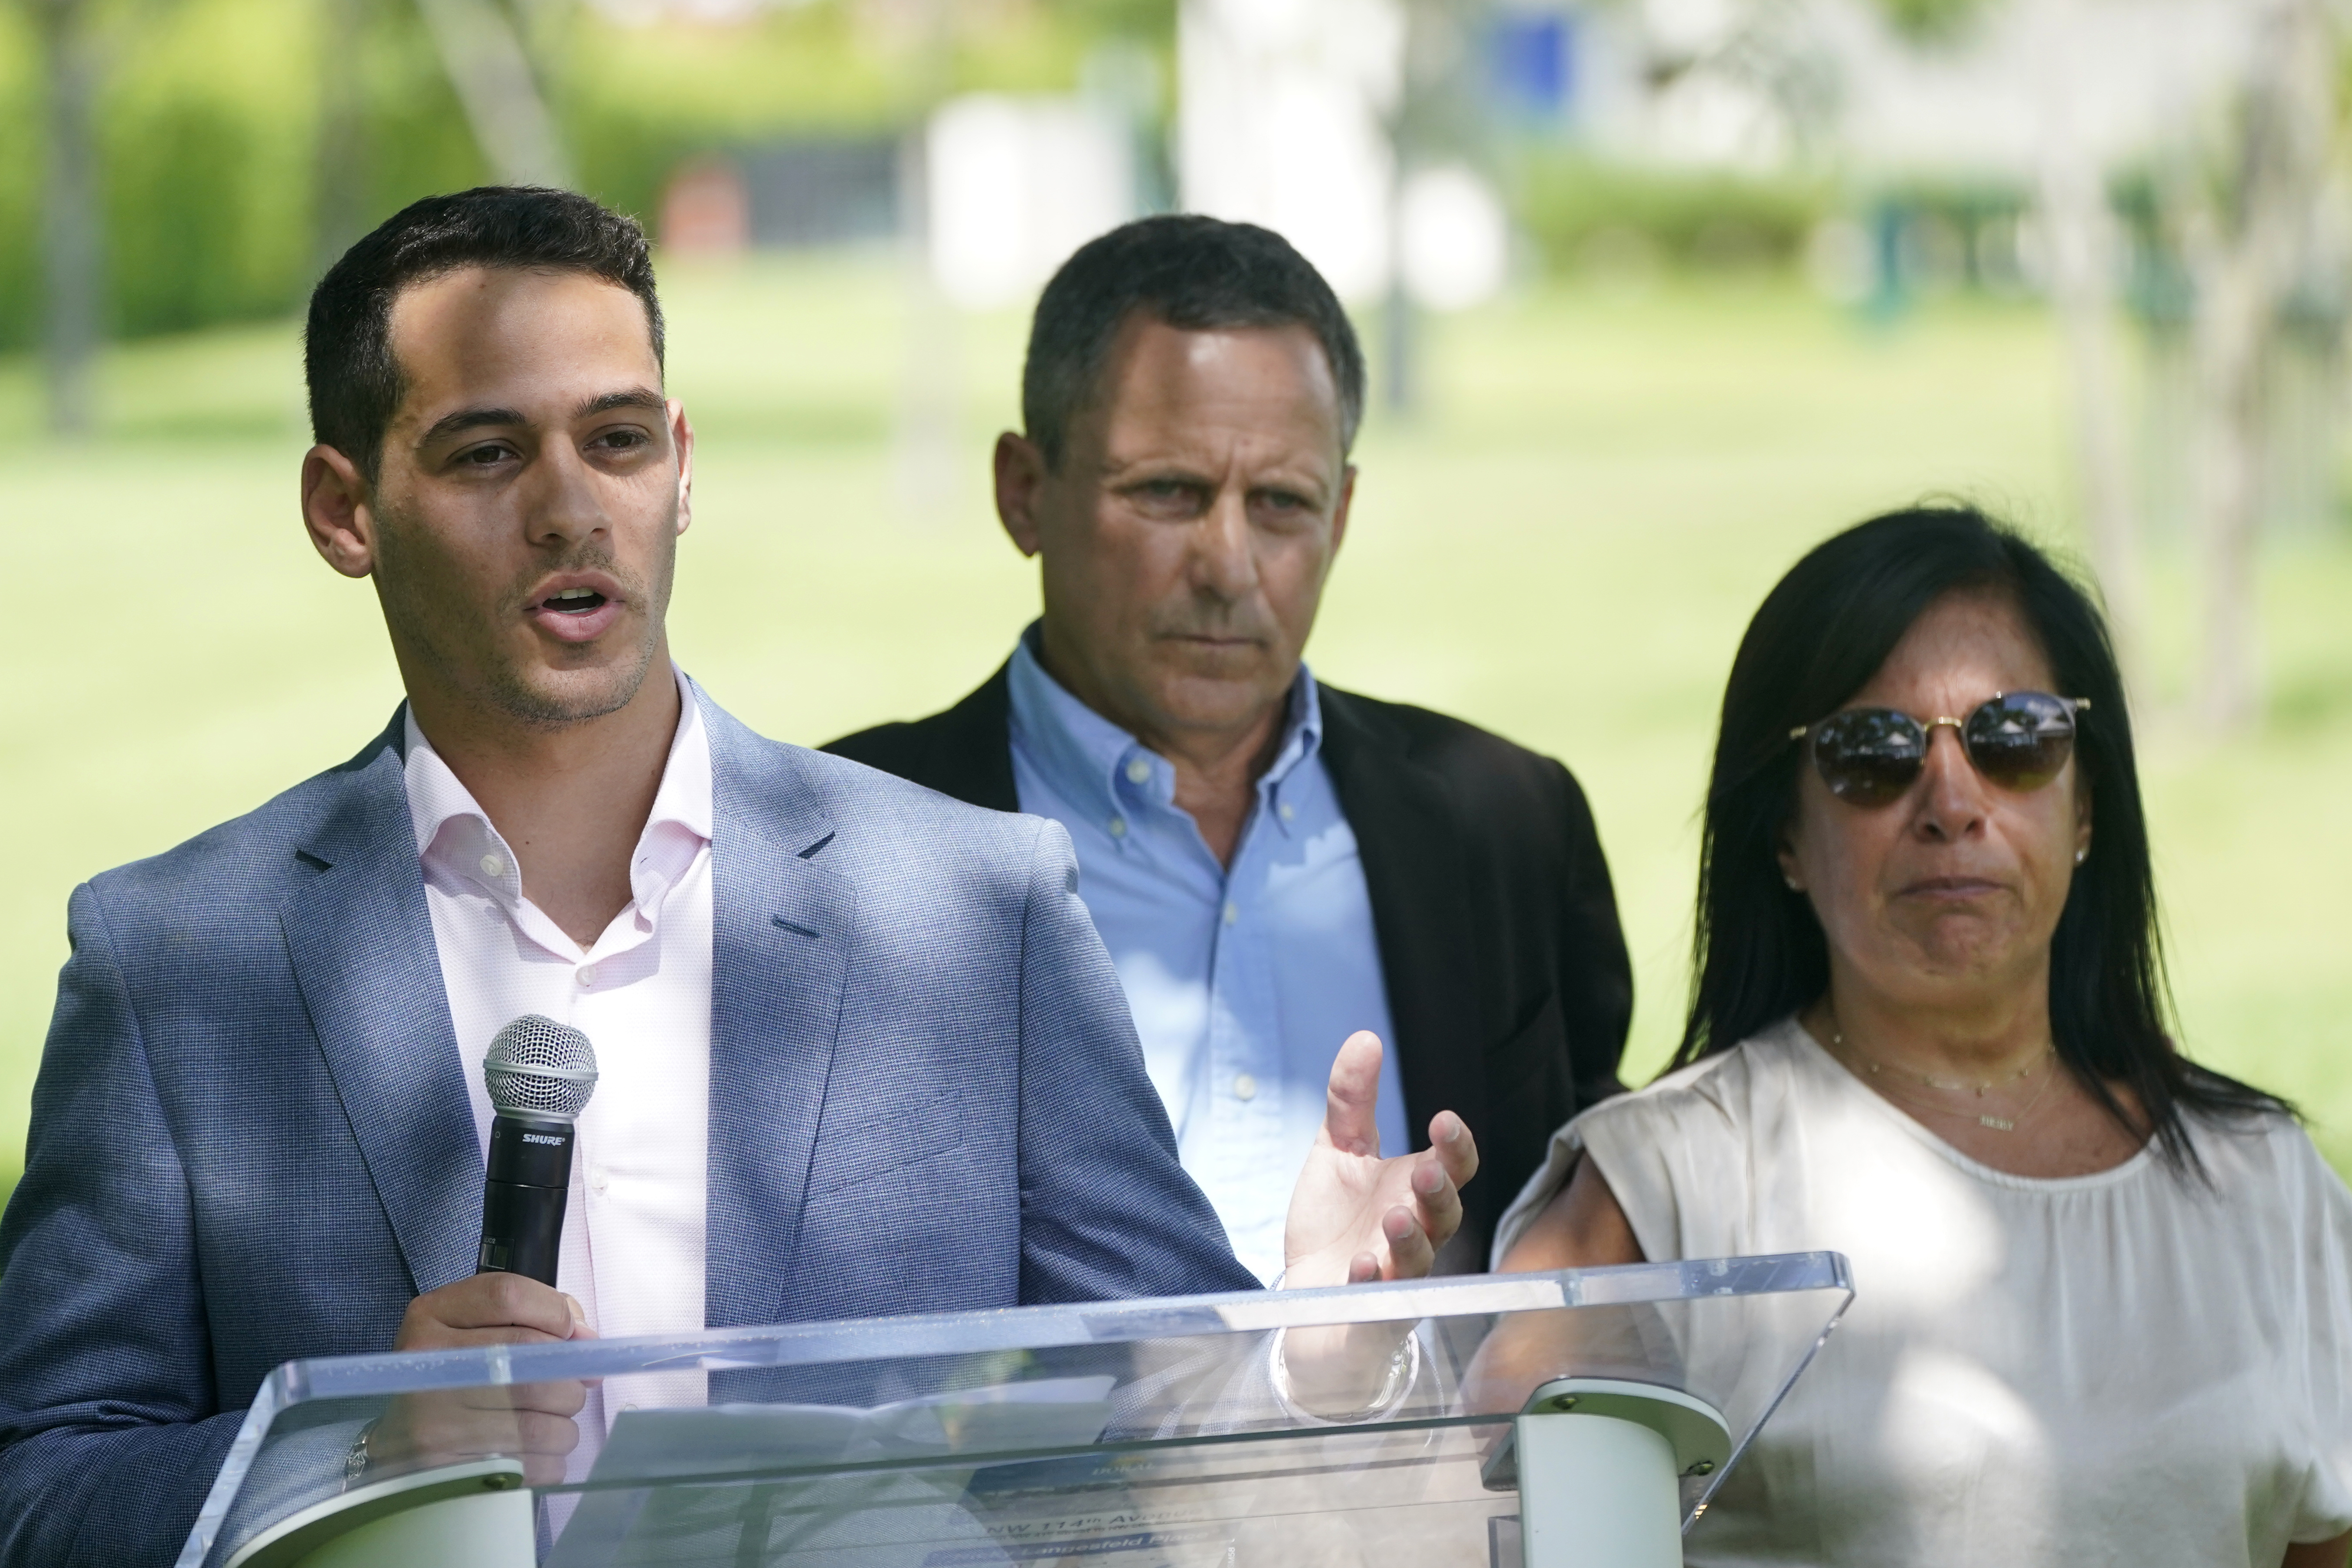 Martin Langesfeld, left, is joined by his parents Pablo and Andrea Langesfeld, as they speak at ceremony honoring Martin's sister and Pablo and Andrea's daughter Nicole "Nicky" Langesfeld, who died in the Surfside, Fla., condo collapse, before unveiling a sign for "Nicky Langesfeld Place," Wednesday, June 22, 2022, in Doral, Fla. Langesfeld grew up in Doral before moving to Surfside. (AP Photo/Wilfredo Lee)